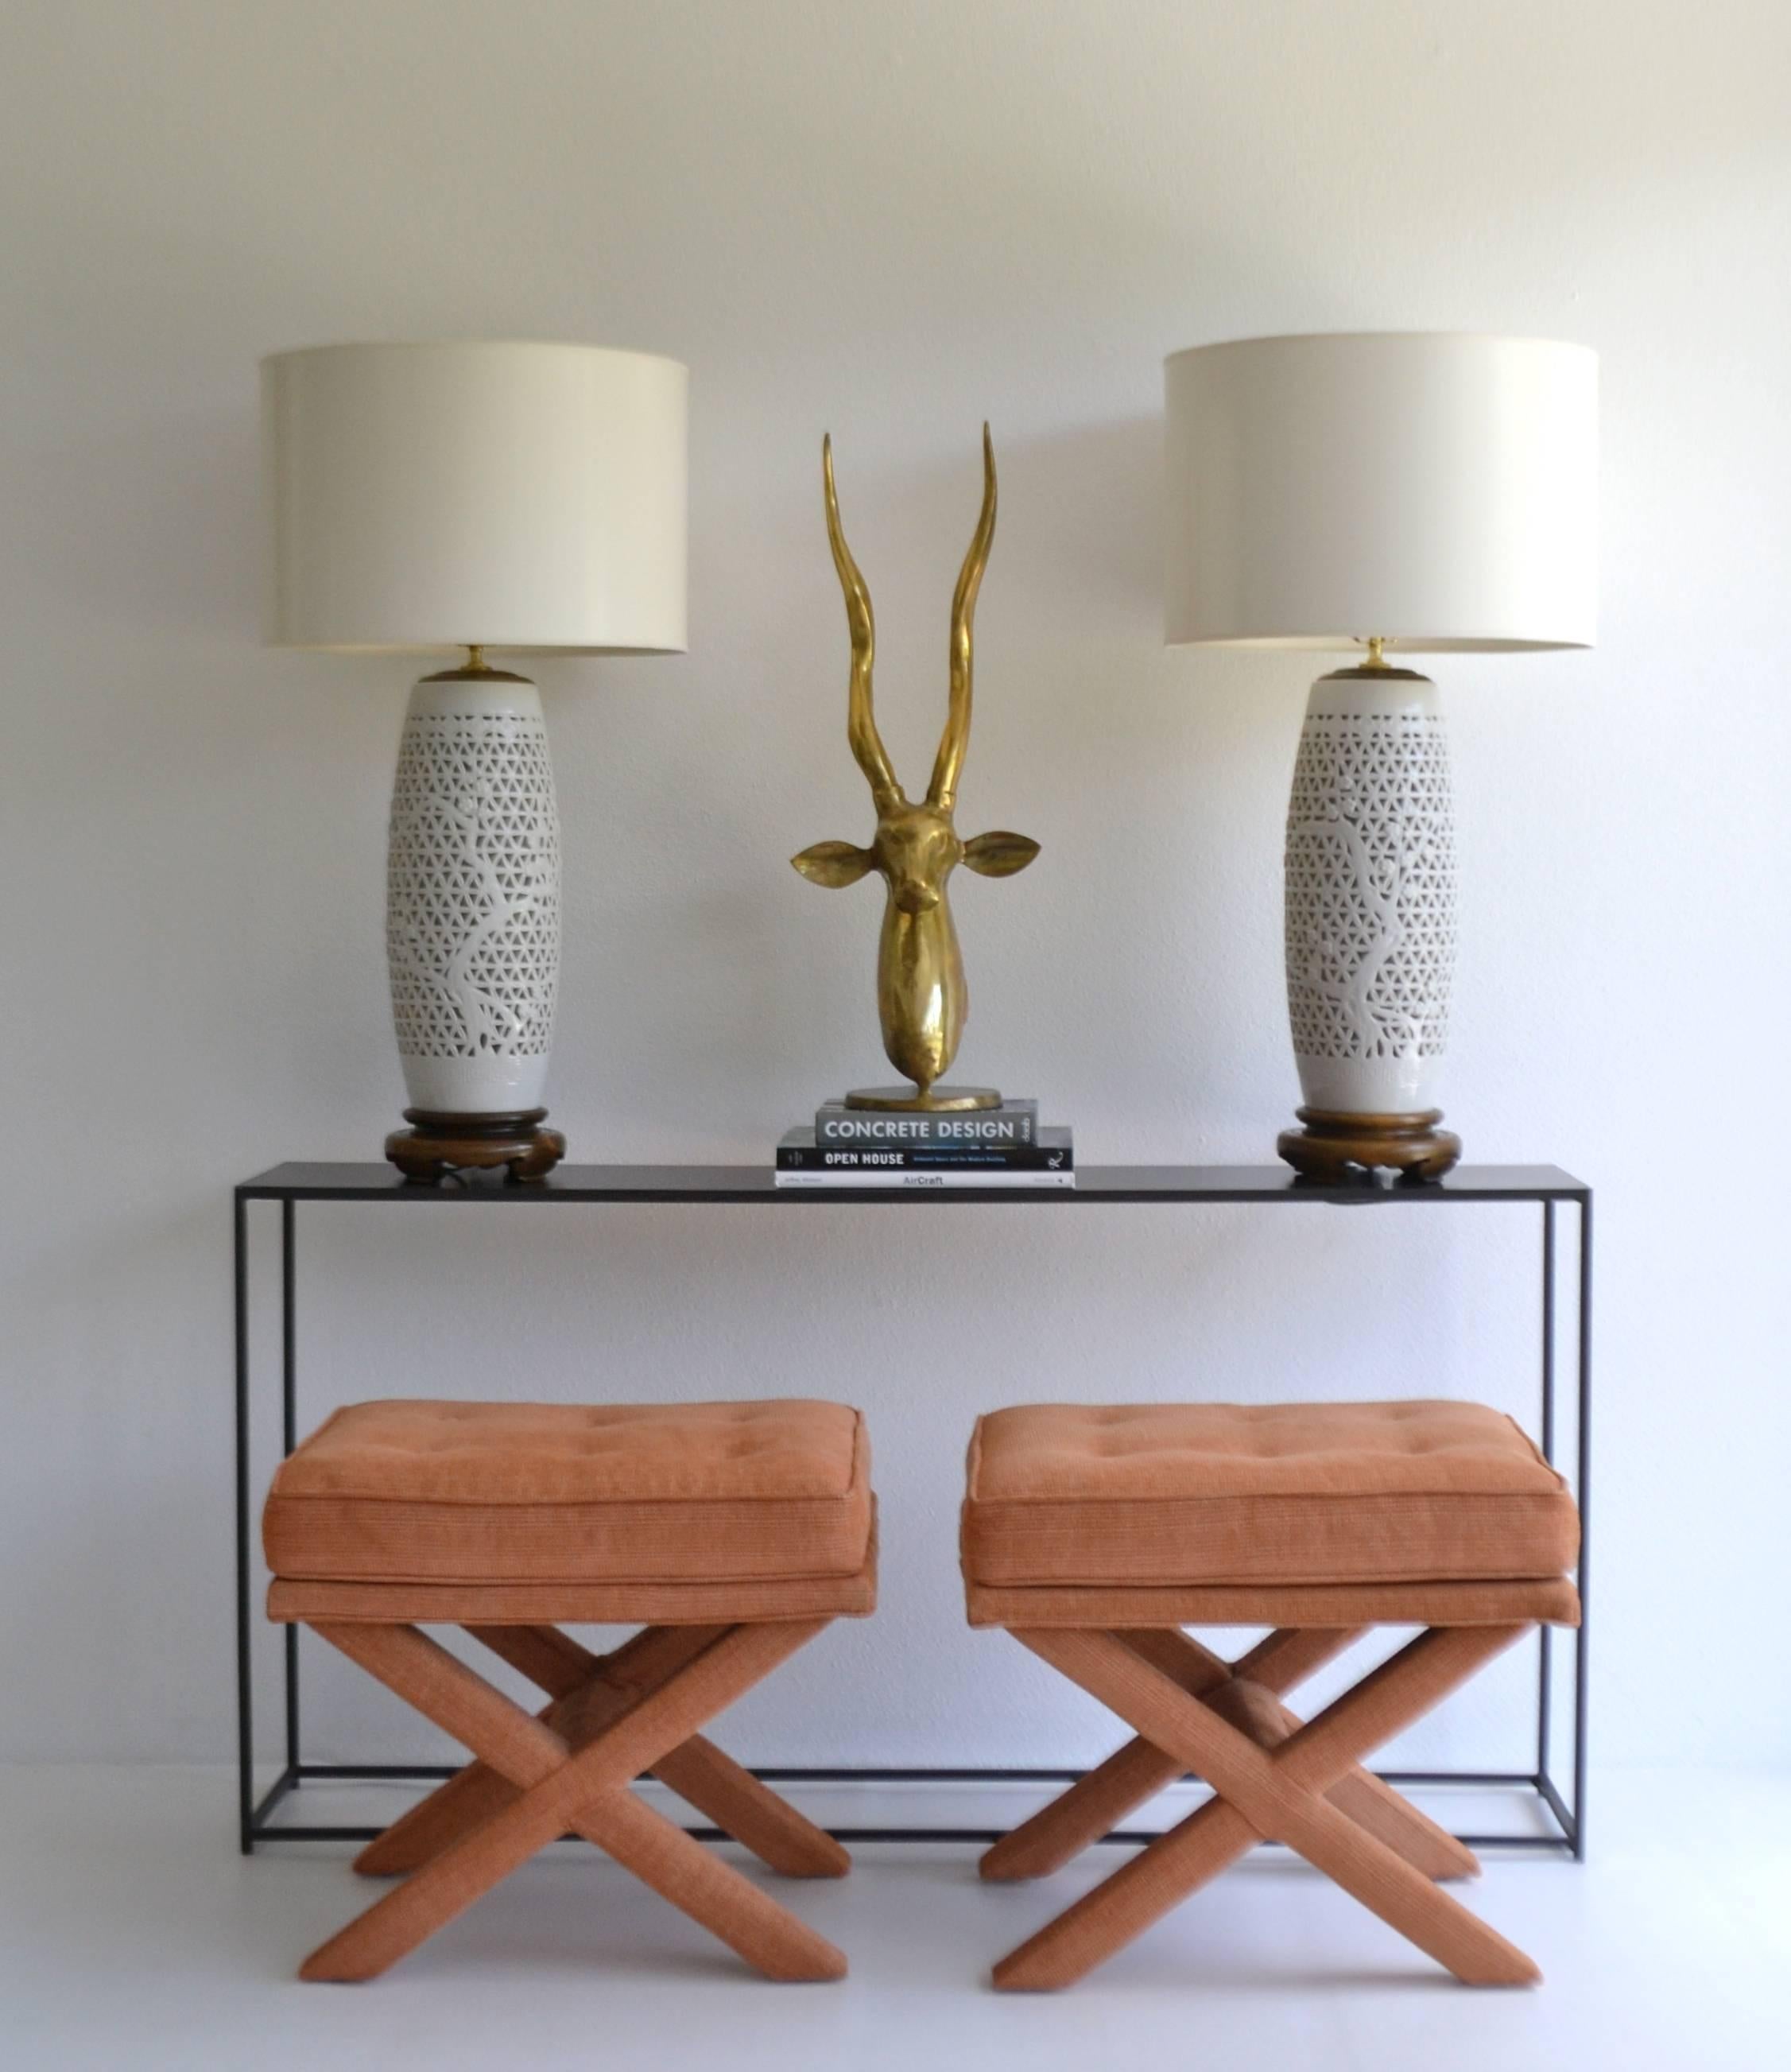 Glamorous pair of Hollywood Regency Asian inspired reticulated Blanc de Chine table lamps, circa 1940s -1950s. These incredible pierced porcelain white glazed table lamps are accented with foliate decoration and mounted on carved wooden bases and